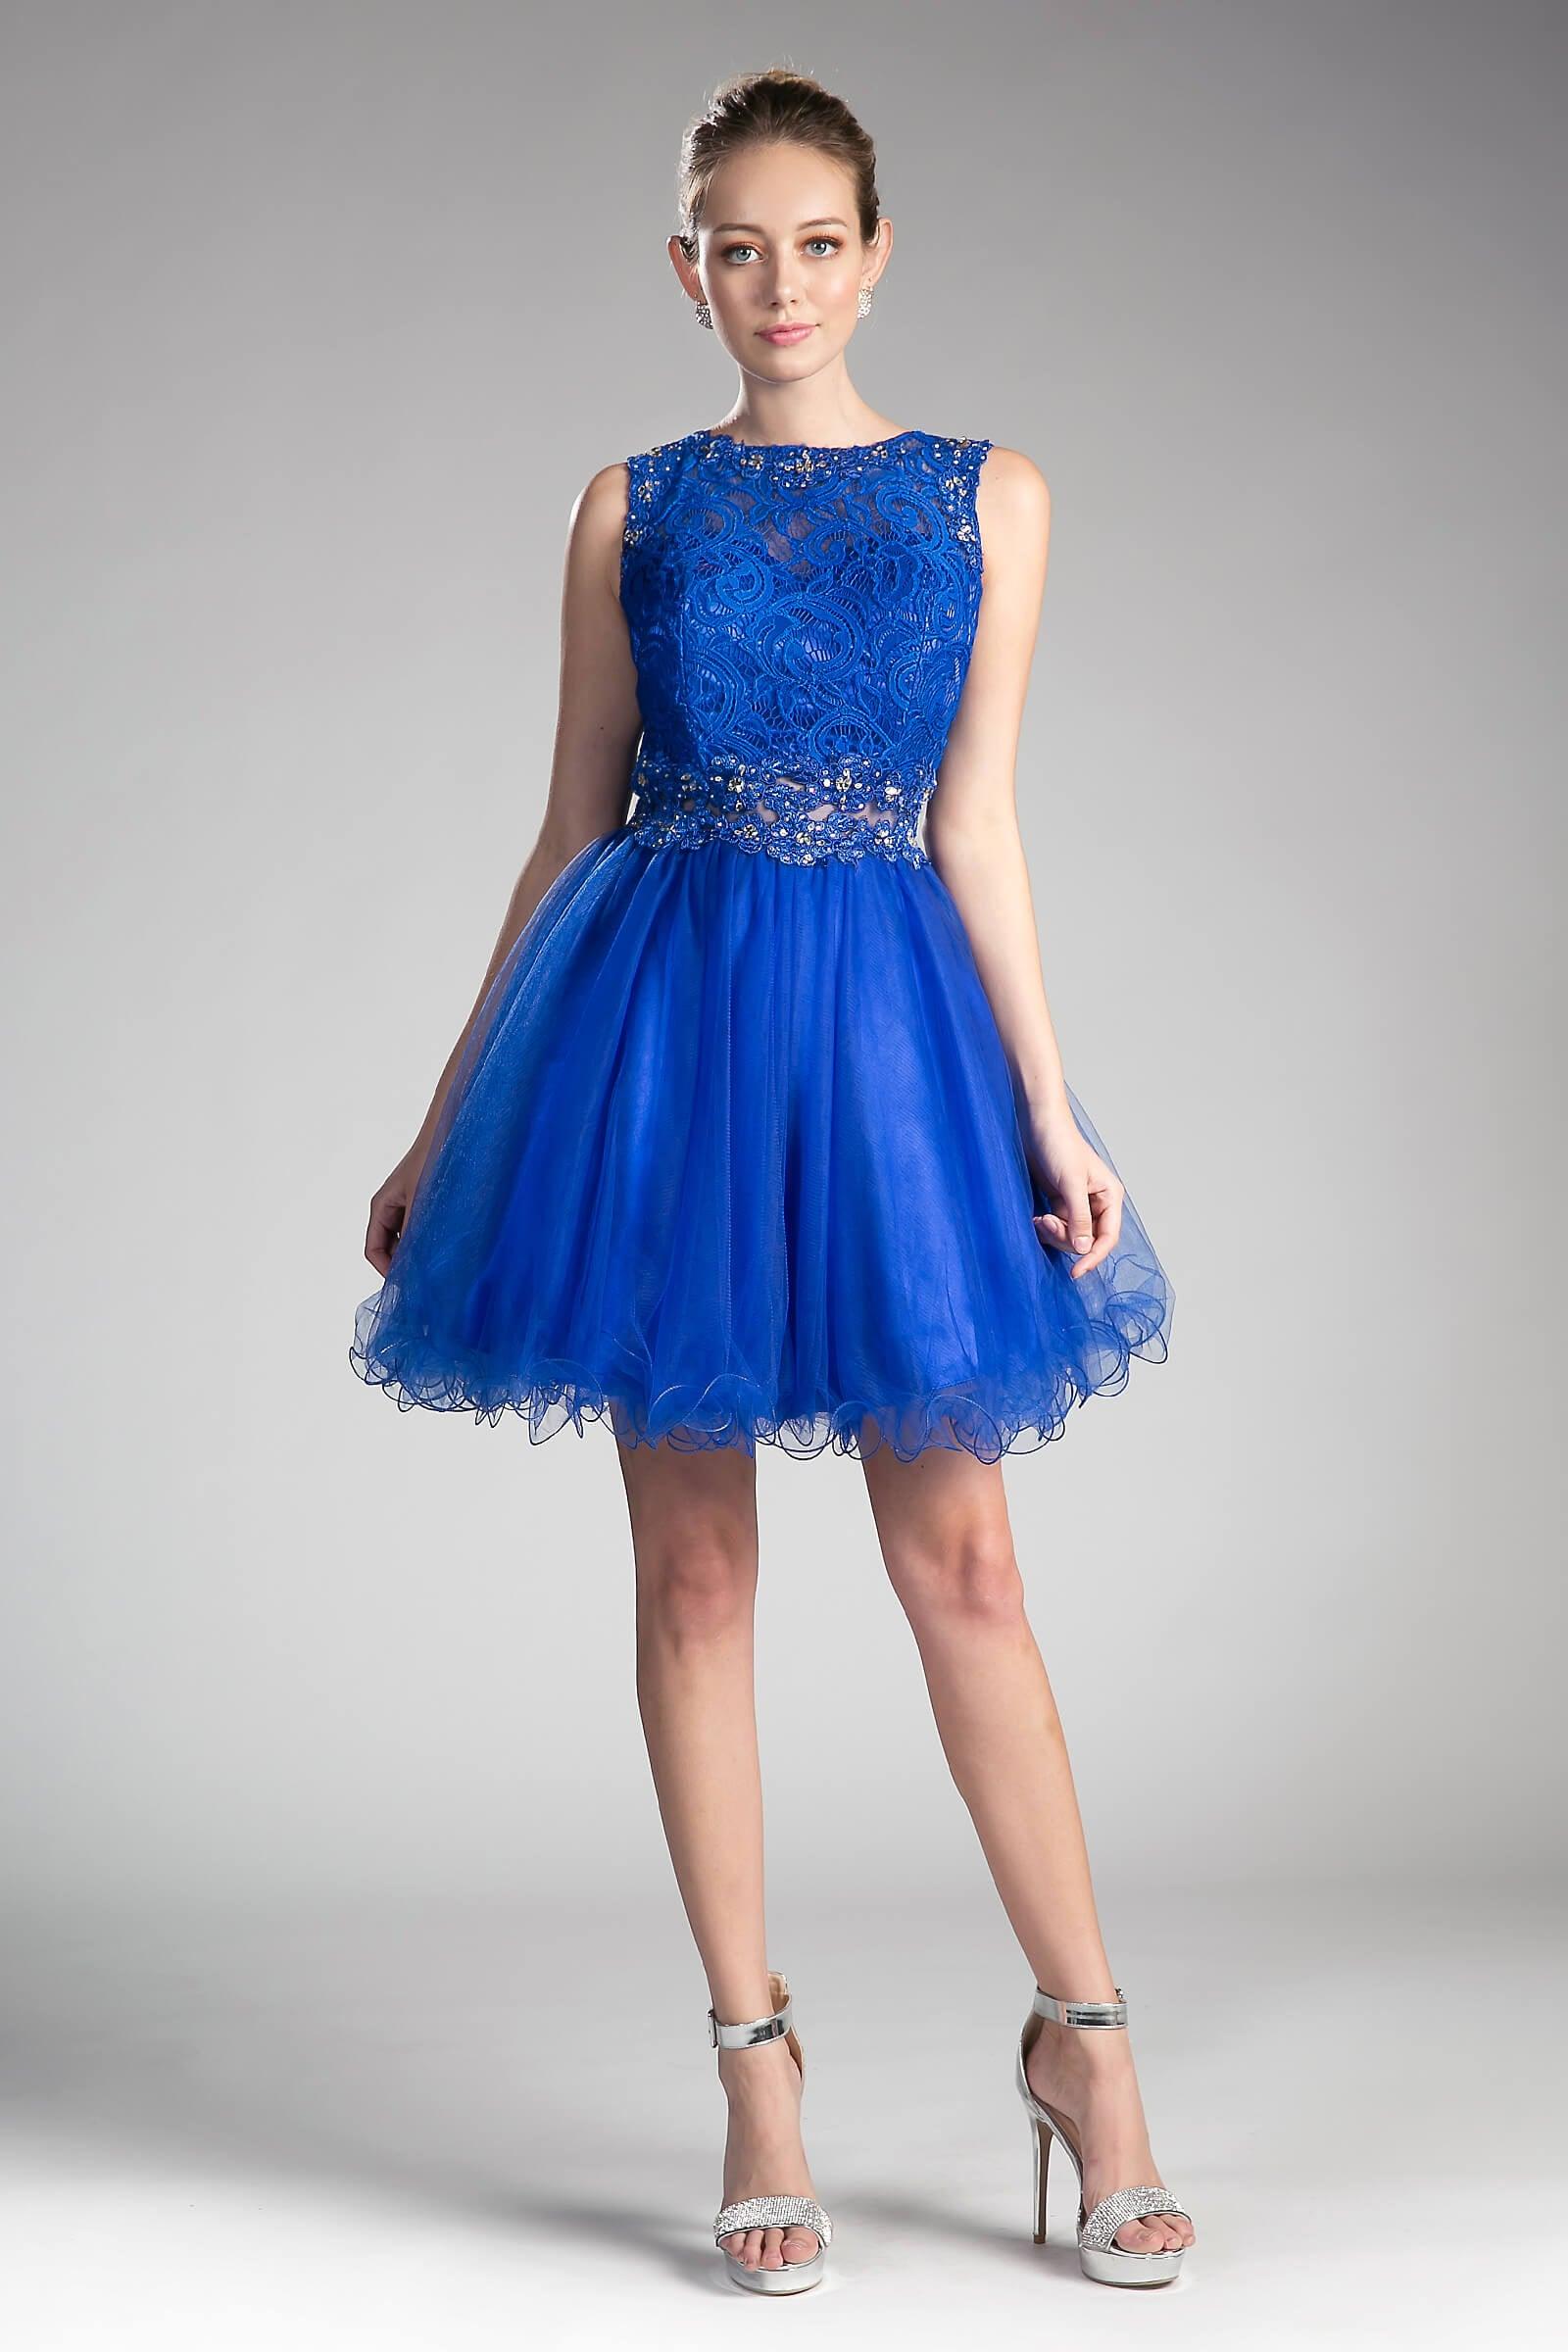 Homecoming Short Dress Beaded Lace Cocktail Prom - The Dress Outlet Cinderella Divine